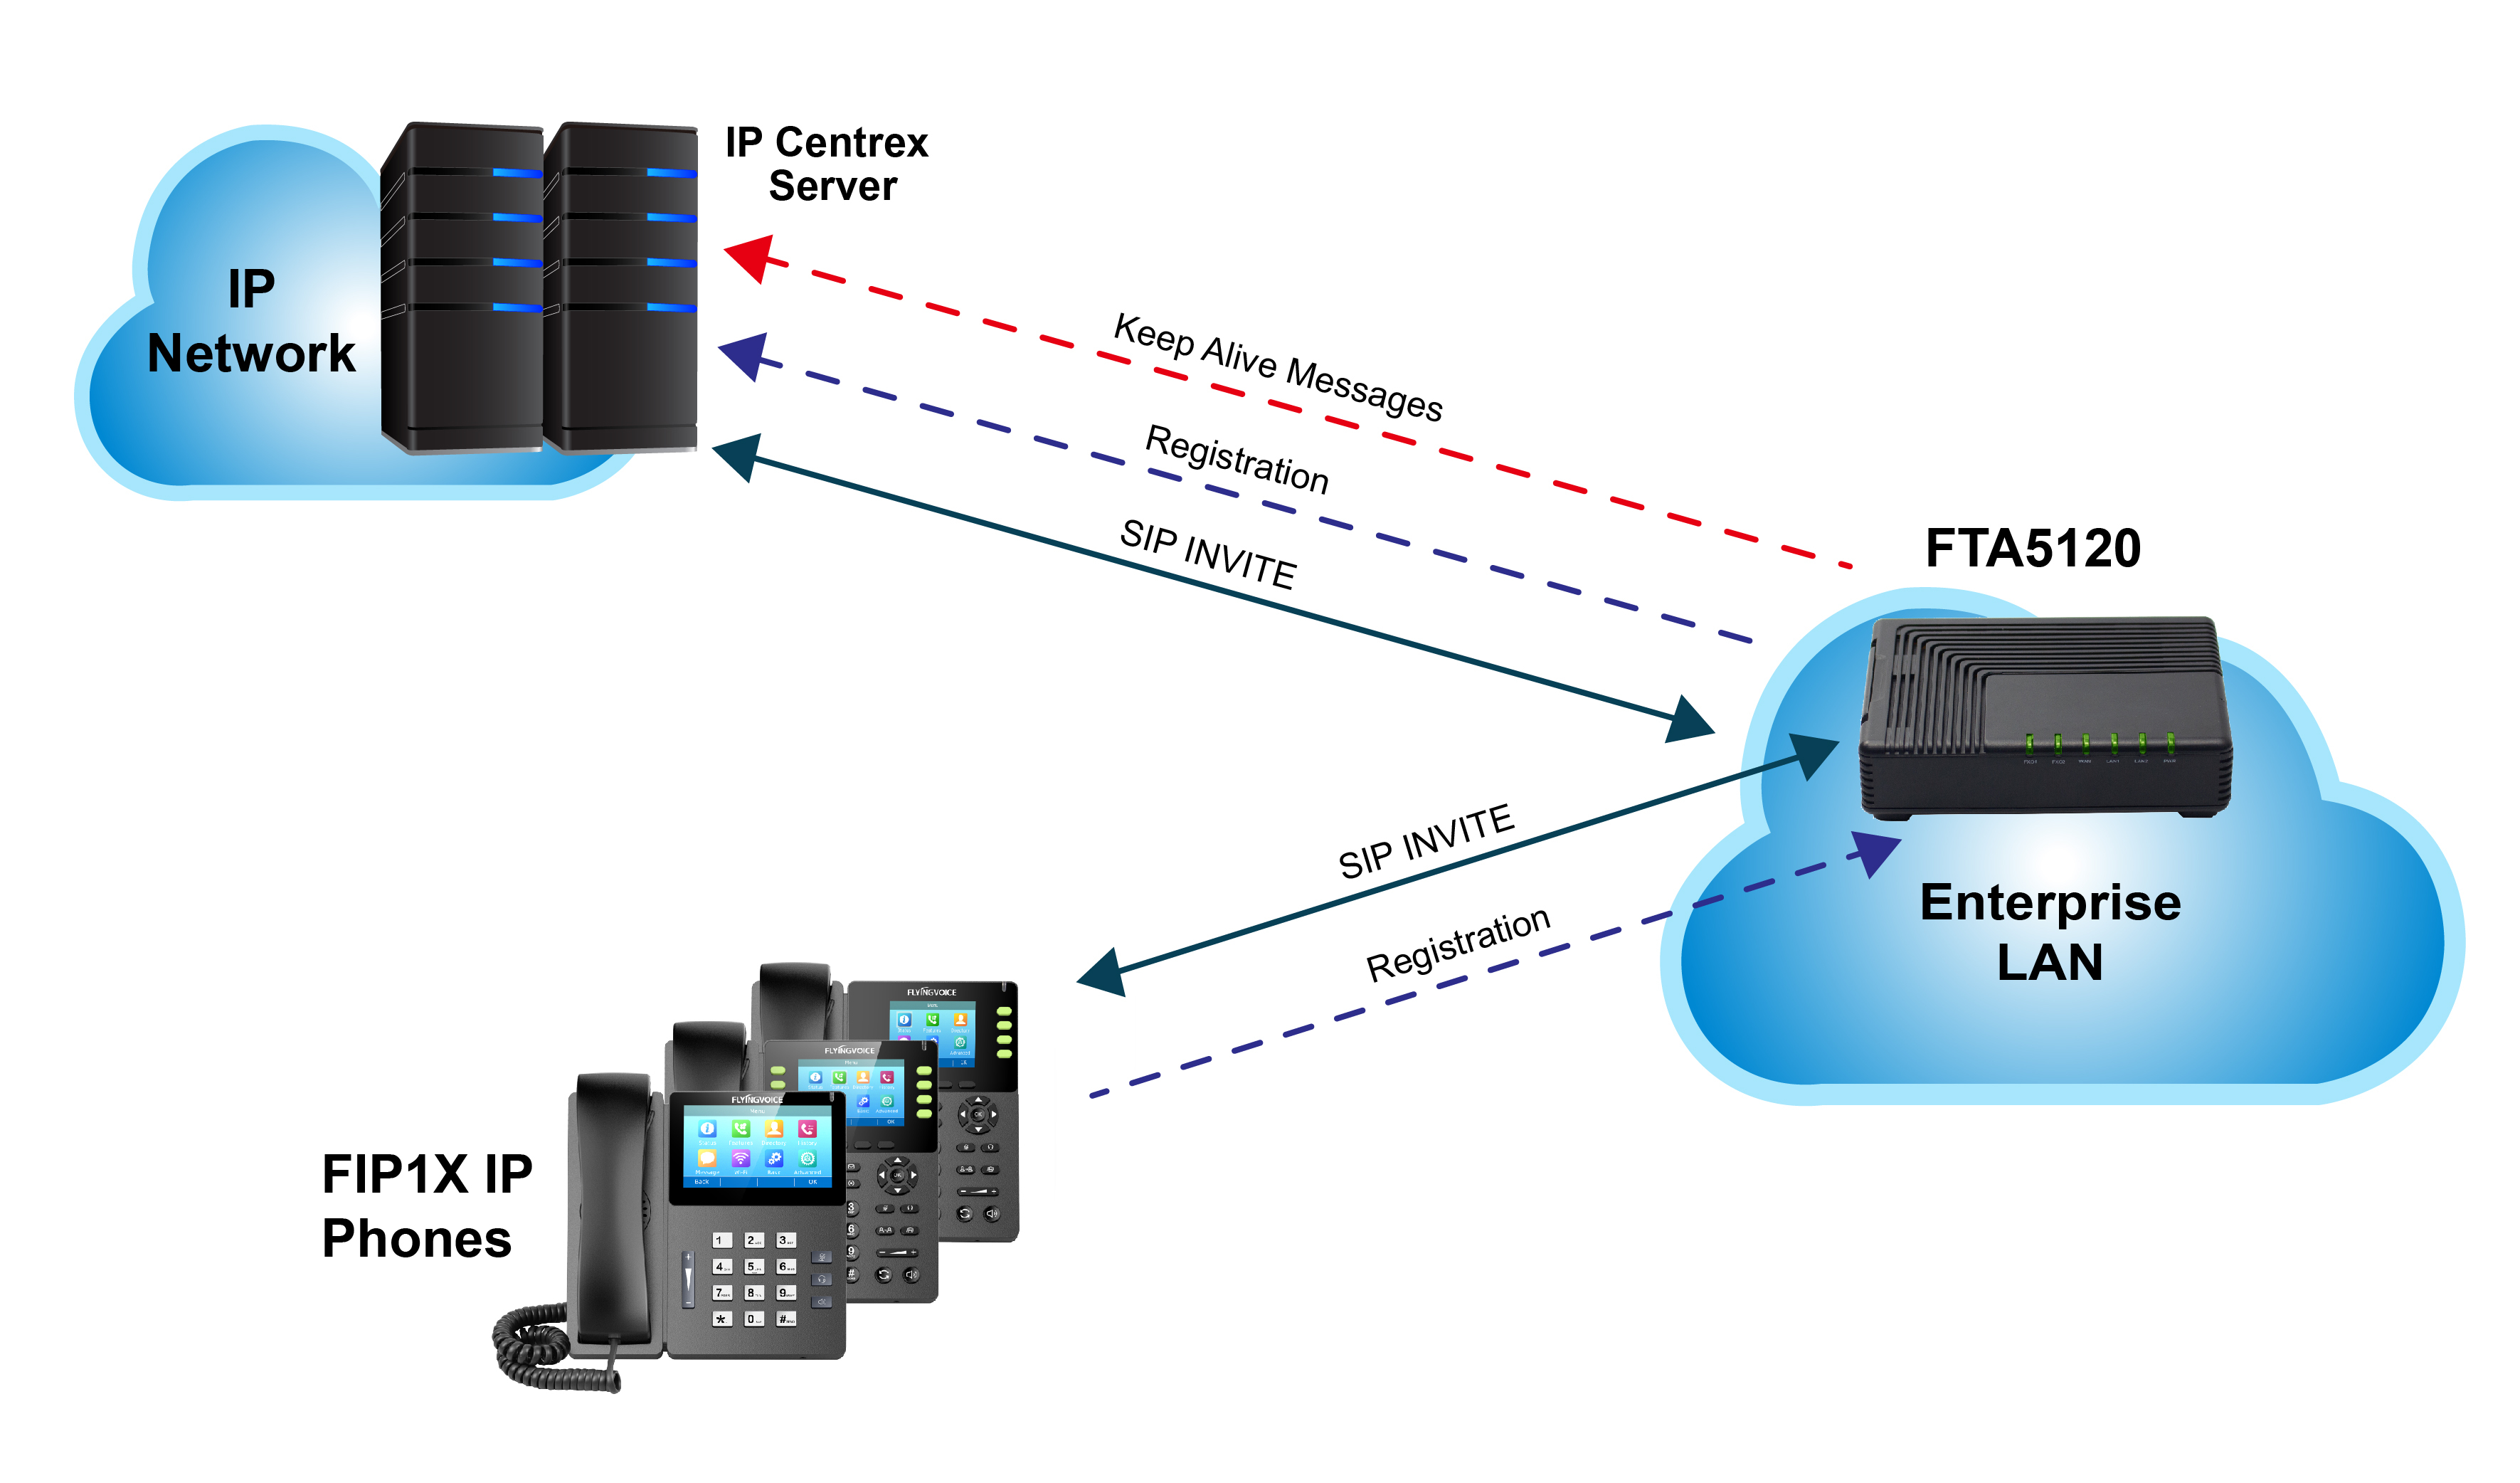 In the normal state, FTA5120 receives REGISTER requests from the FIP1X IP Phones and forwards them to the external proxy normally.